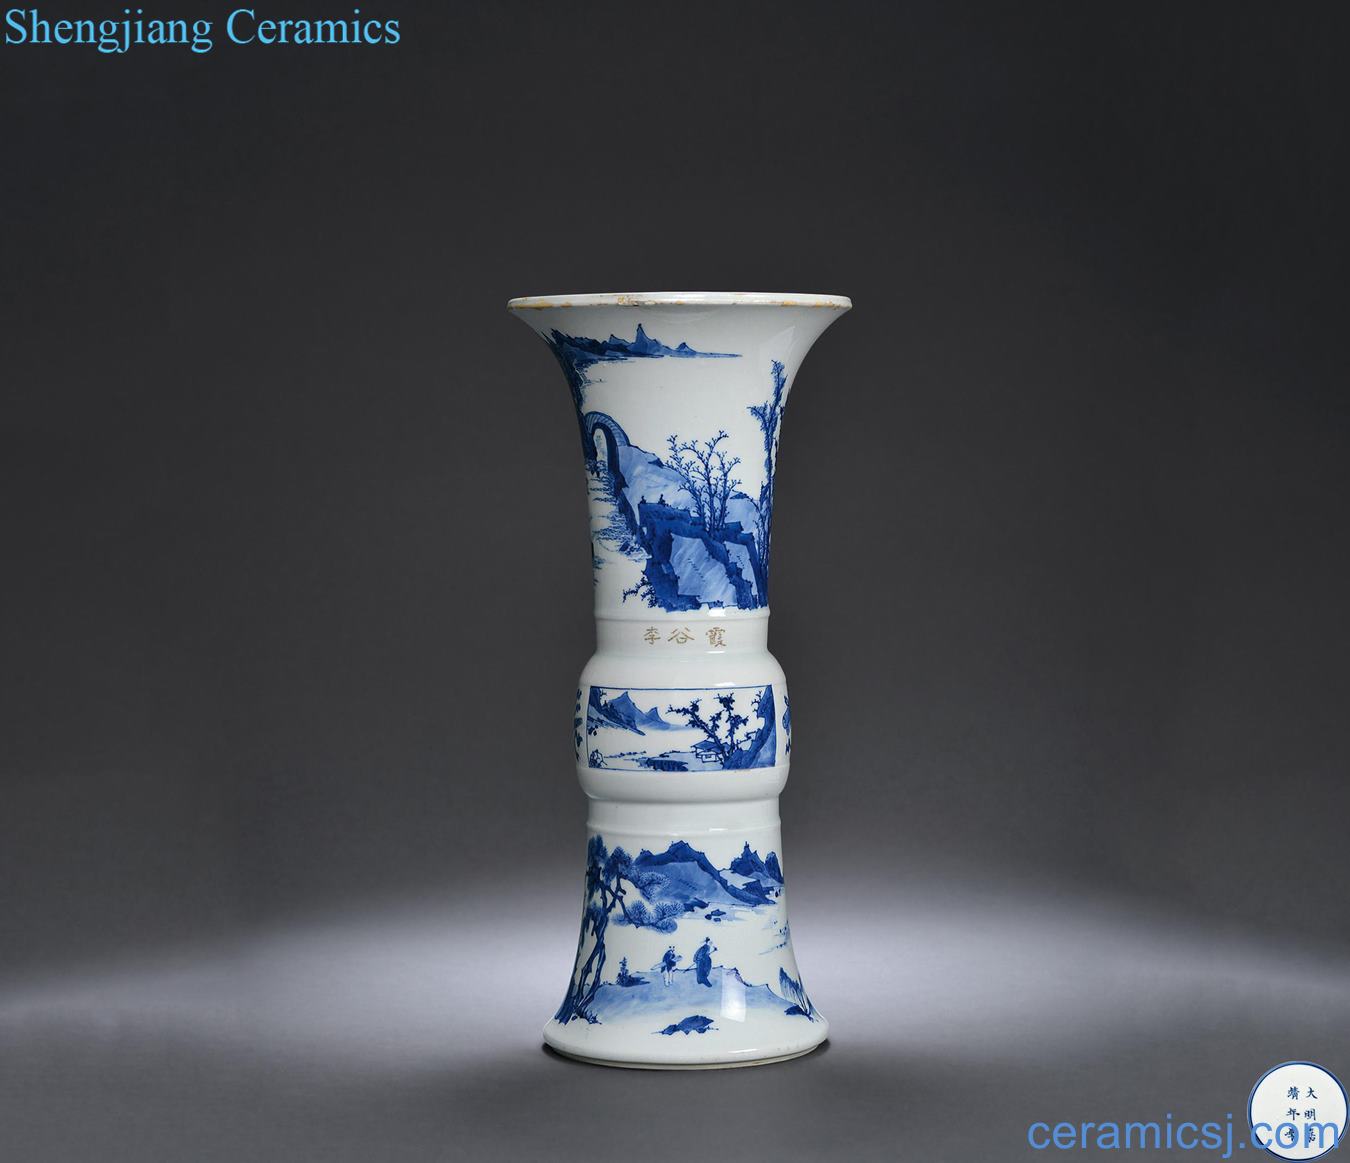 The qing emperor kangxi Blue and white landscape pattern vase with flowers